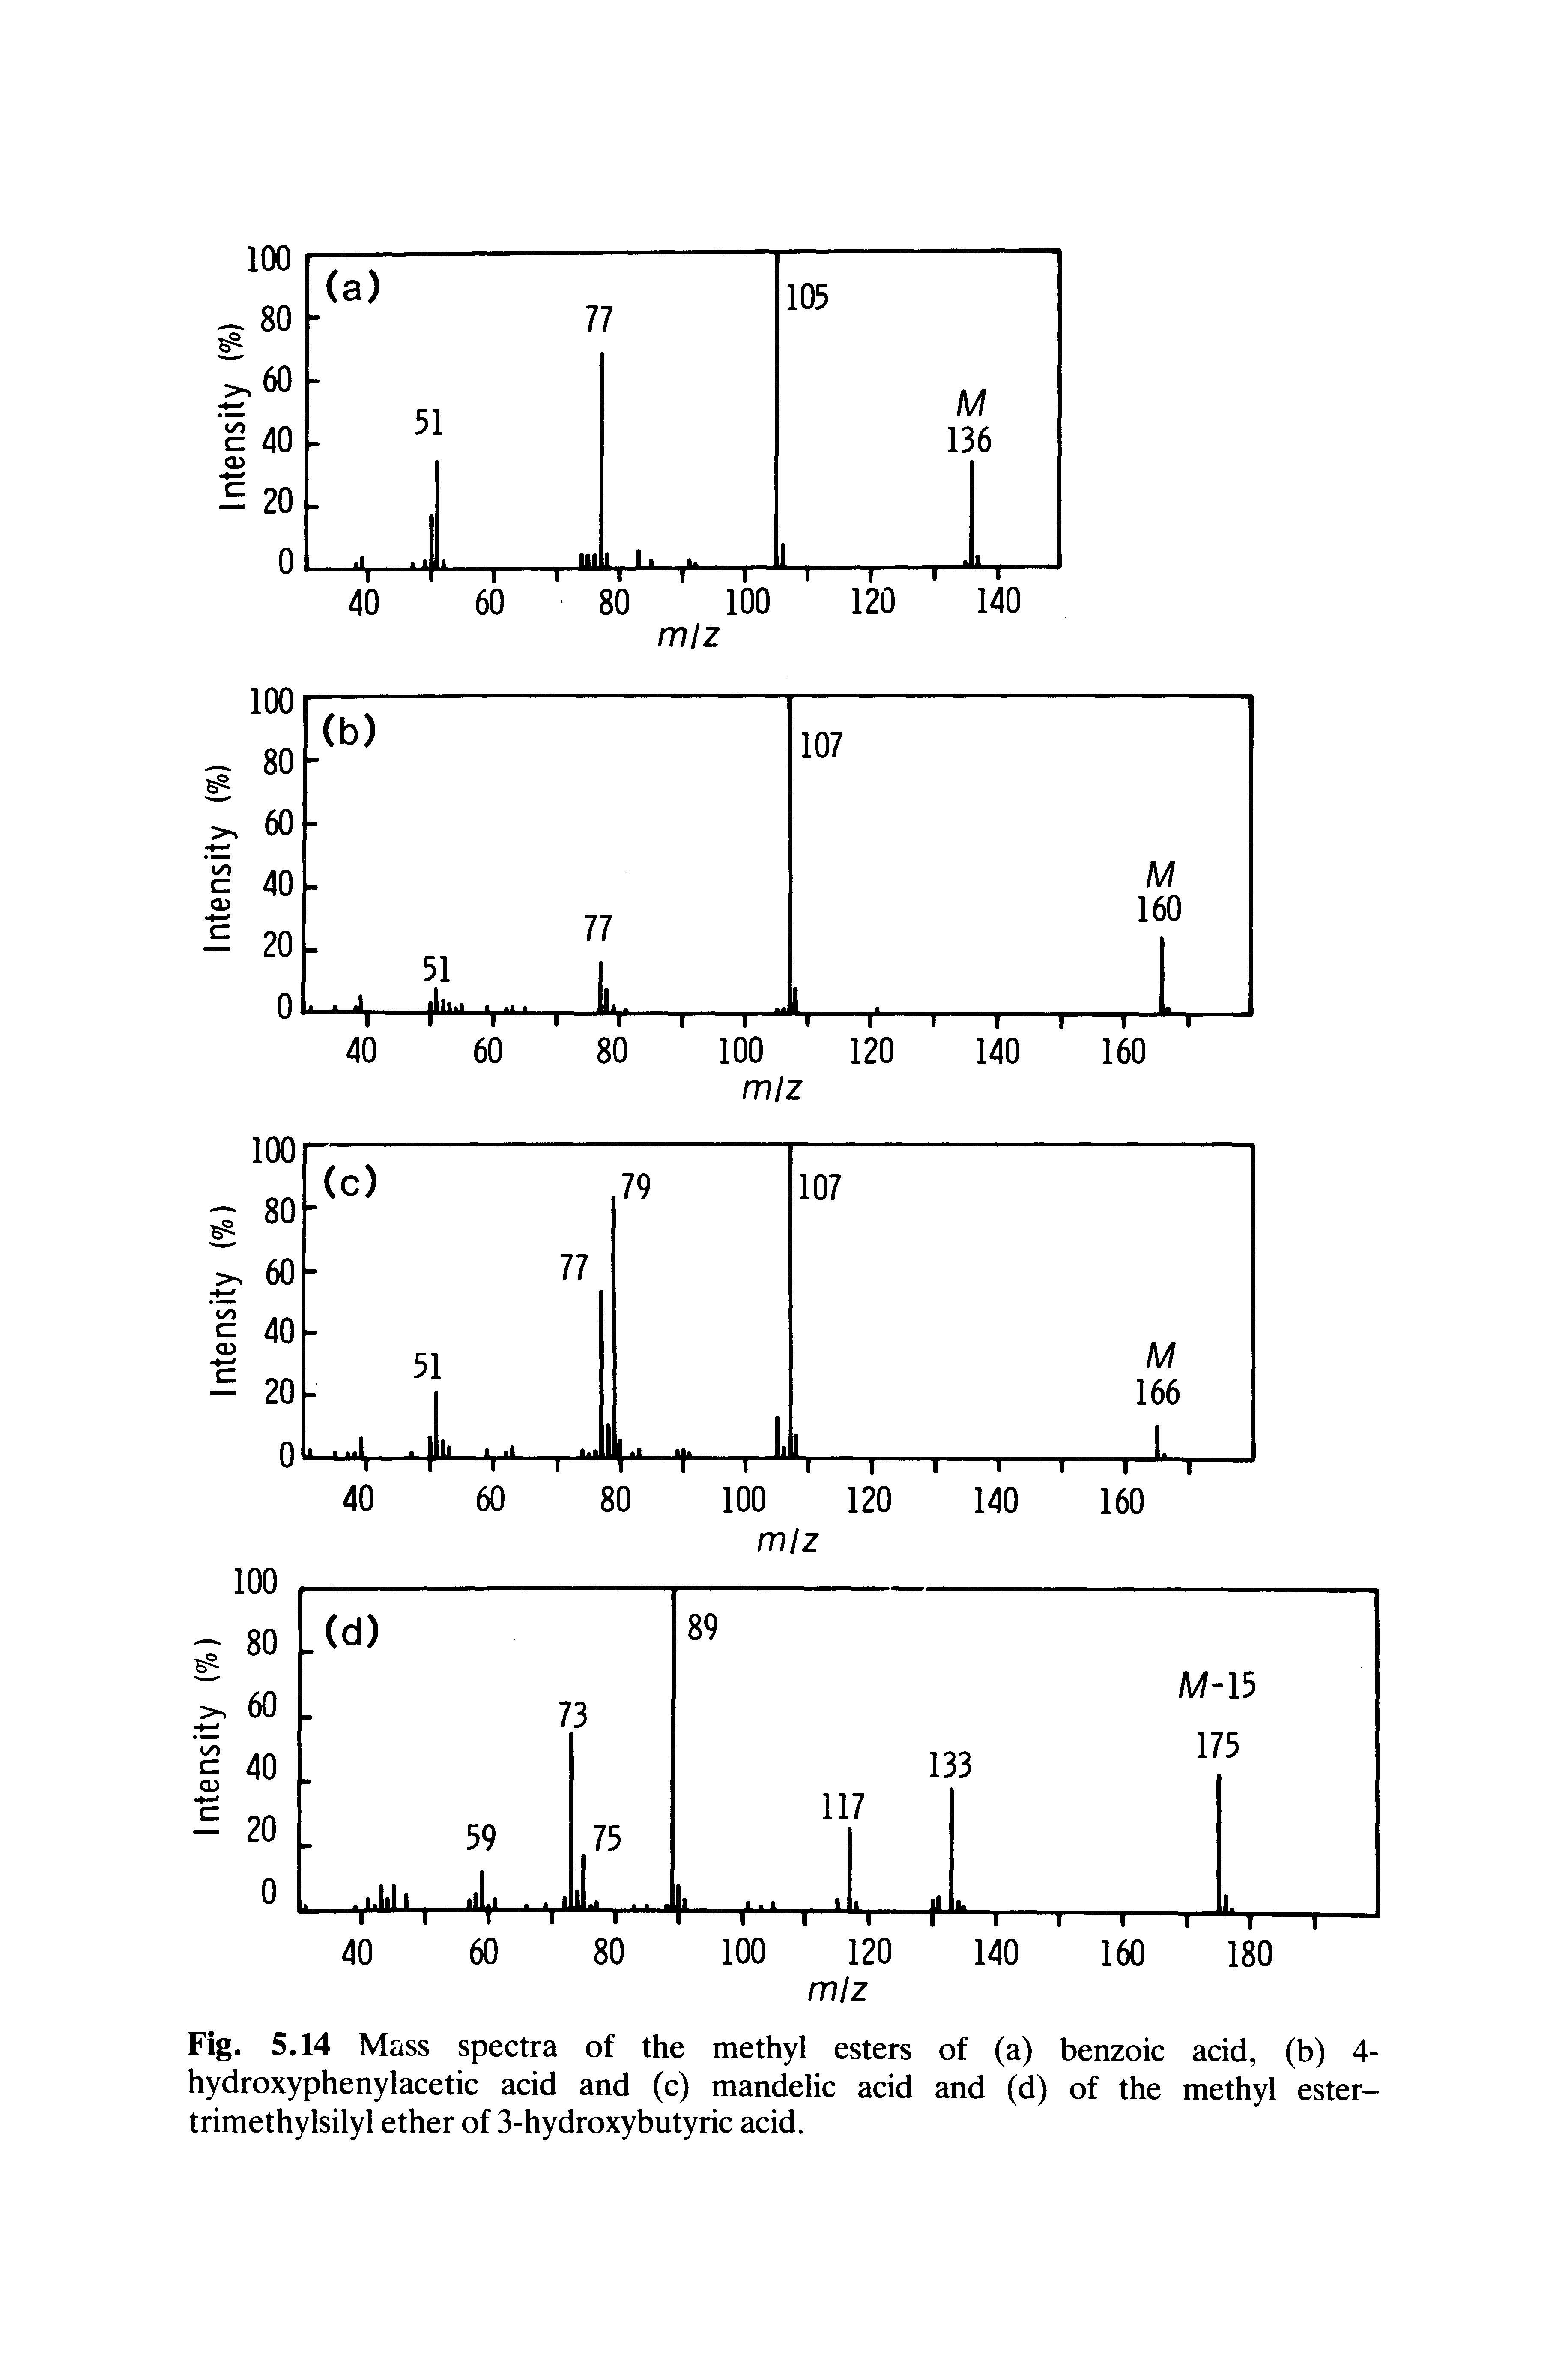 Fig. 5.14 Mass spectra of the methyl esters of (a) benzoic acid, (b) 4-hydroxyphenylacetic acid and (c) mandelic acid and (d) of the methyl ester-trimethylsilyl ether of 3-hydroxybutyric acid.